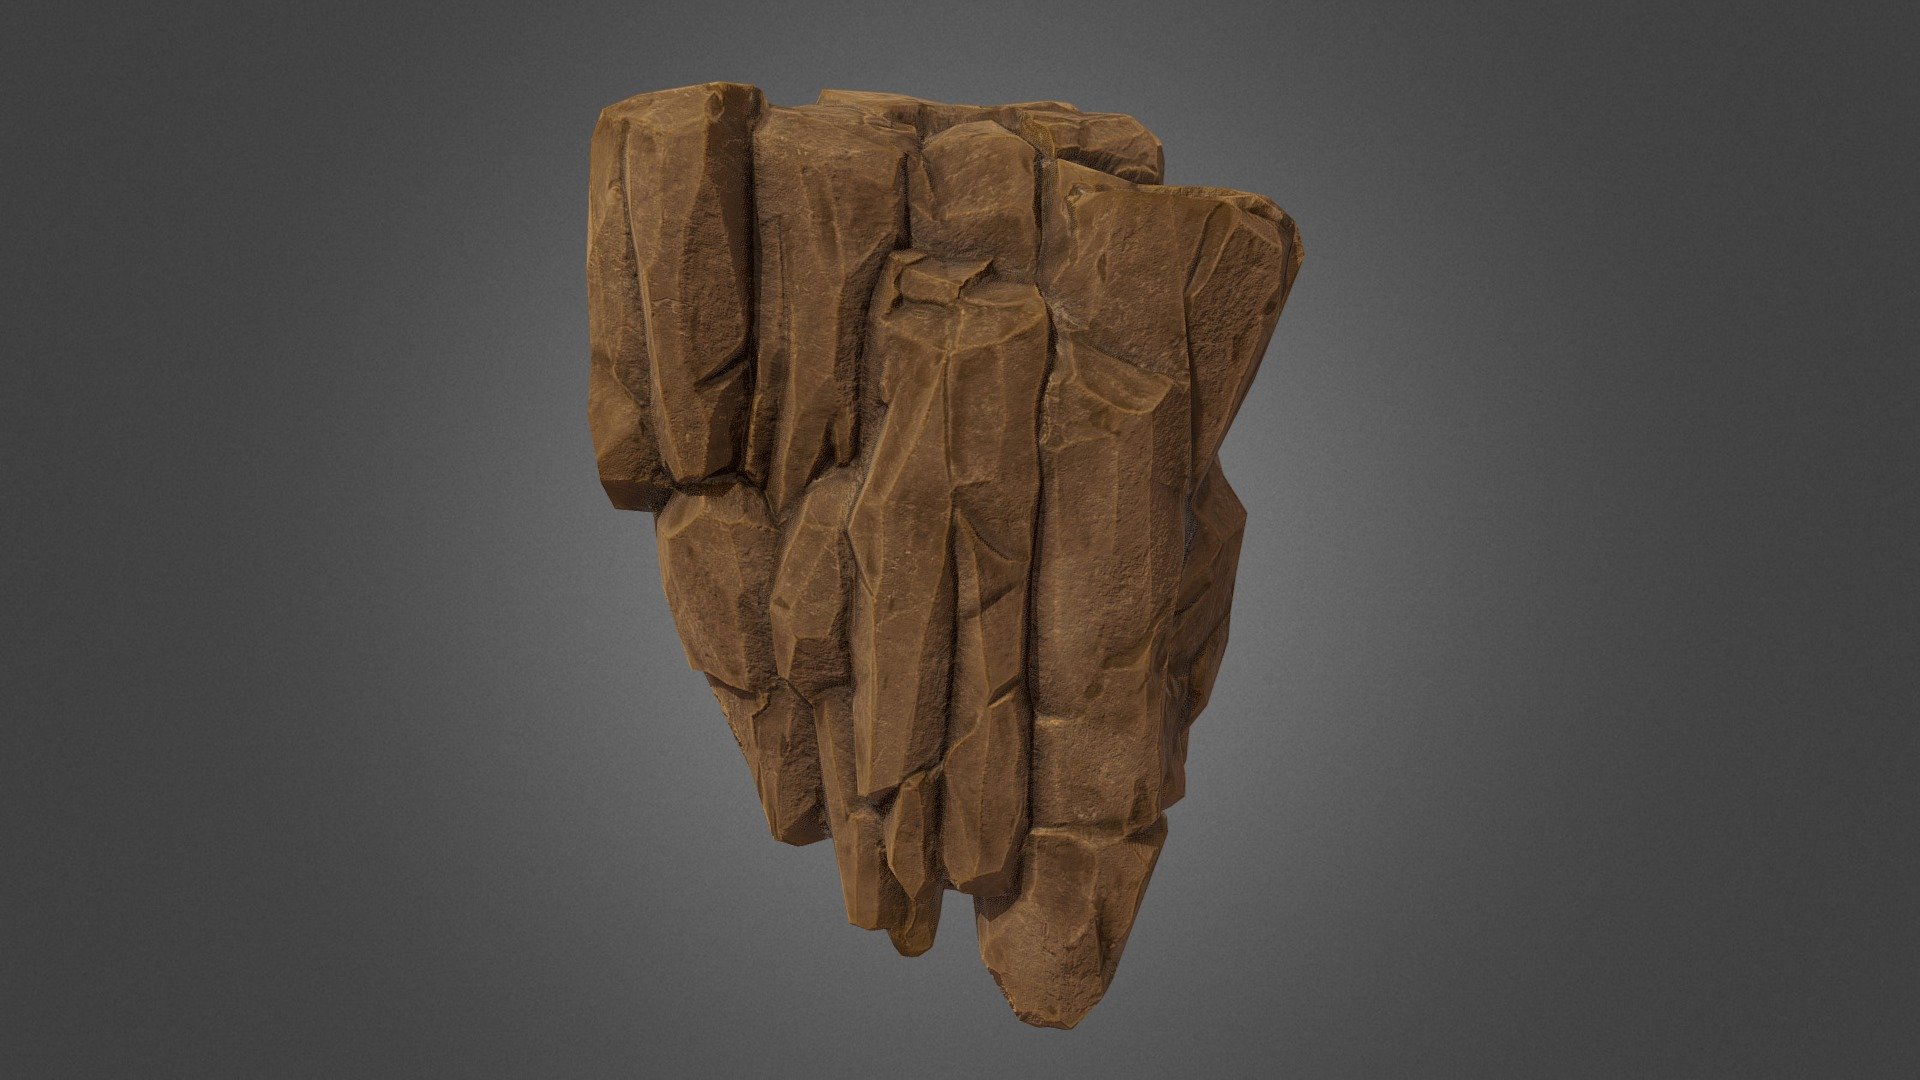 I did this modular Rock with Z brush and texturized it in Substance Painting. This model is part of Windfolk´s videogame environmen

if you want to see more of my work this is my artstation: https://www.artstation.com/sonsonz

Windfolk videogame: https://twitter.com/FractalFall?lang=es https://www.instagram.com/fractalfall/ - Stylized Modular Rock - 3D model by Son_Gelbert (@Son58) 3d model